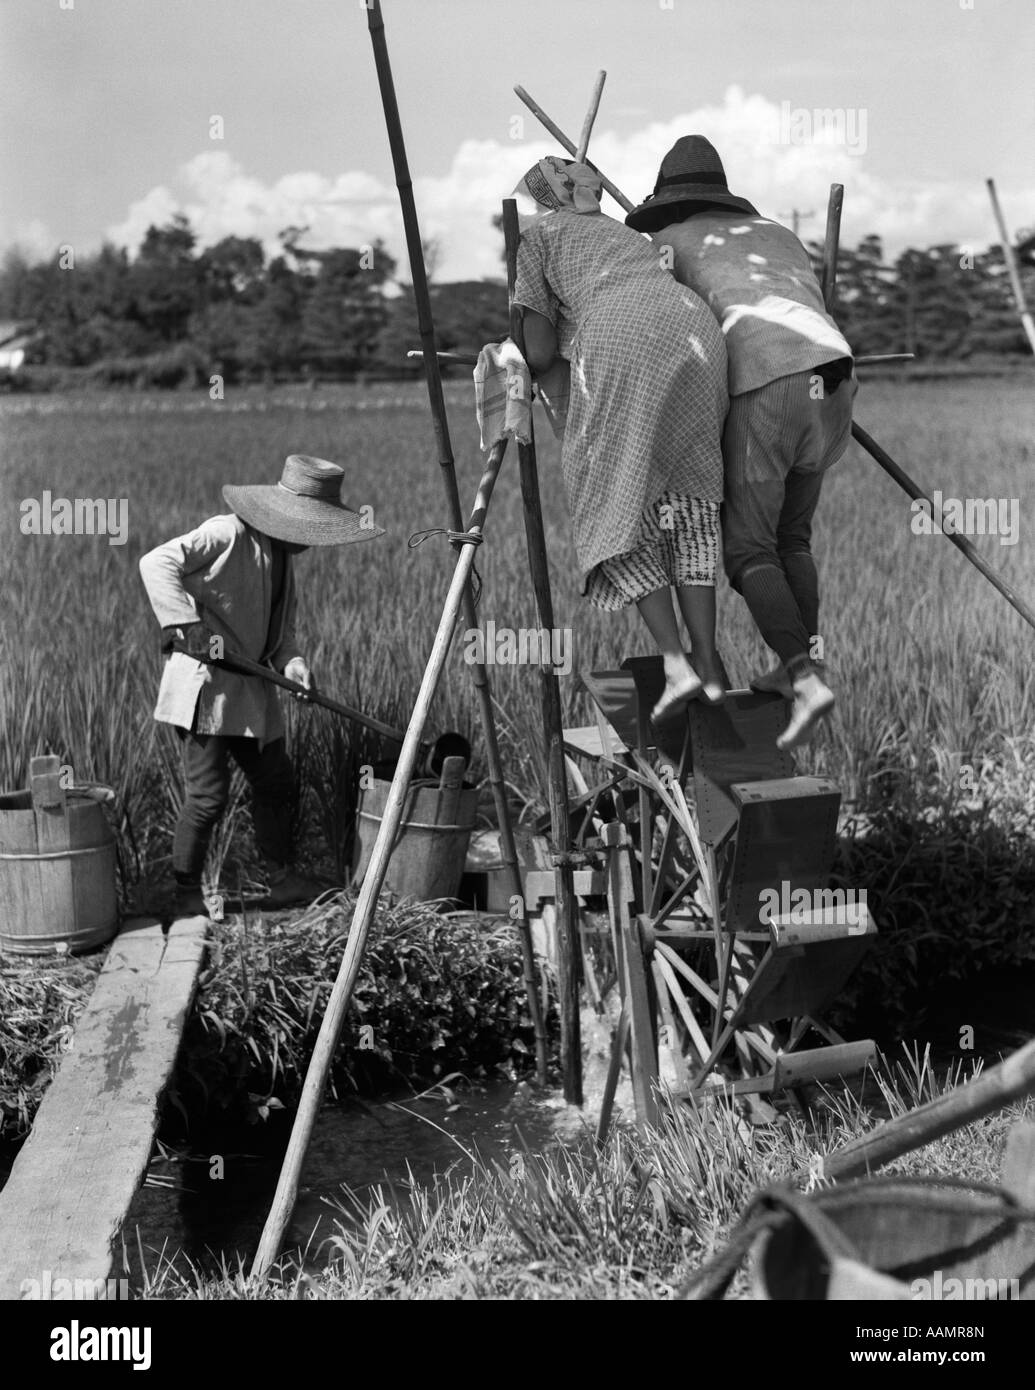 1930s IRRIGATING RICE FIELD NEAR OSAKA JAPAN TWO WORKERS TREADING WATER WHEEL FARMER WORKING BUCKET IRRIGATION FARM AGRICULTURE Stock Photo